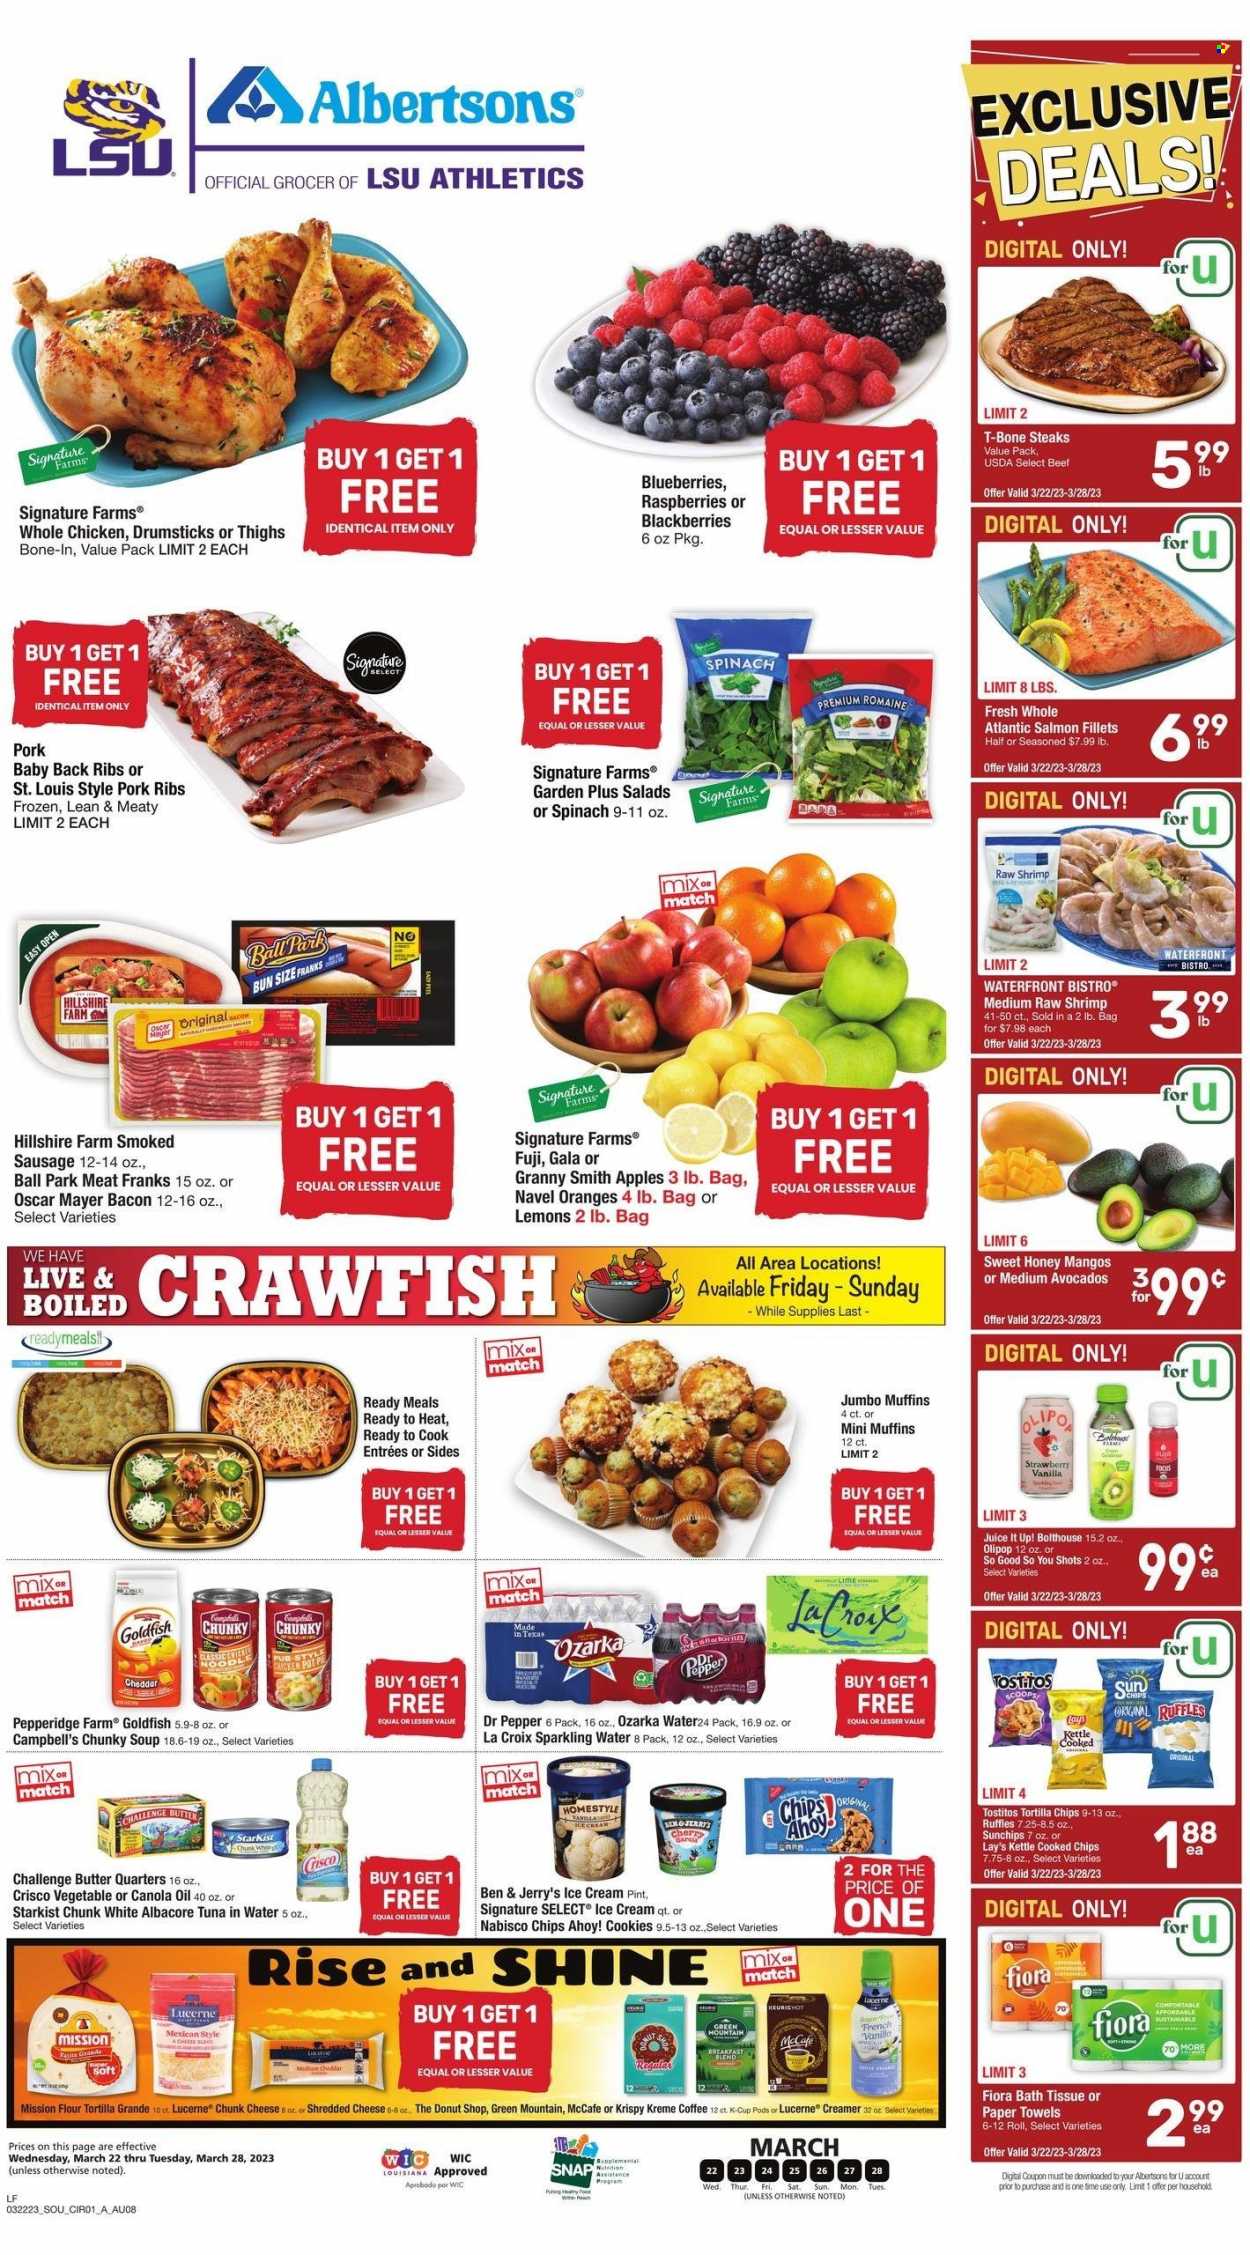 thumbnail - Albertsons Flyer - 03/22/2023 - 03/28/2023 - Sales products - muffin, spinach, apples, avocado, blackberries, blueberries, Gala, mango, oranges, Granny Smith, salmon, salmon fillet, tuna, shrimps, StarKist, Campbell's, soup, bacon, Hillshire Farm, Oscar Mayer, sausage, smoked sausage, shredded cheese, creamer, ice cream, Ben & Jerry's, crawfish, cookies, Chips Ahoy!, tortilla chips, Lay’s, Goldfish, Ruffles, Tostitos, Crisco, tuna in water, canola oil, oil, juice, Dr. Pepper, So Good So You, sparkling water, water, coffee, coffee capsules, McCafe, K-Cups, Green Mountain, whole chicken, chicken, beef meat, t-bone steak, steak, ribs, pork meat, pork ribs, pork back ribs, bath tissue, kitchen towels, paper towels, lemons, navel oranges. Page 1.